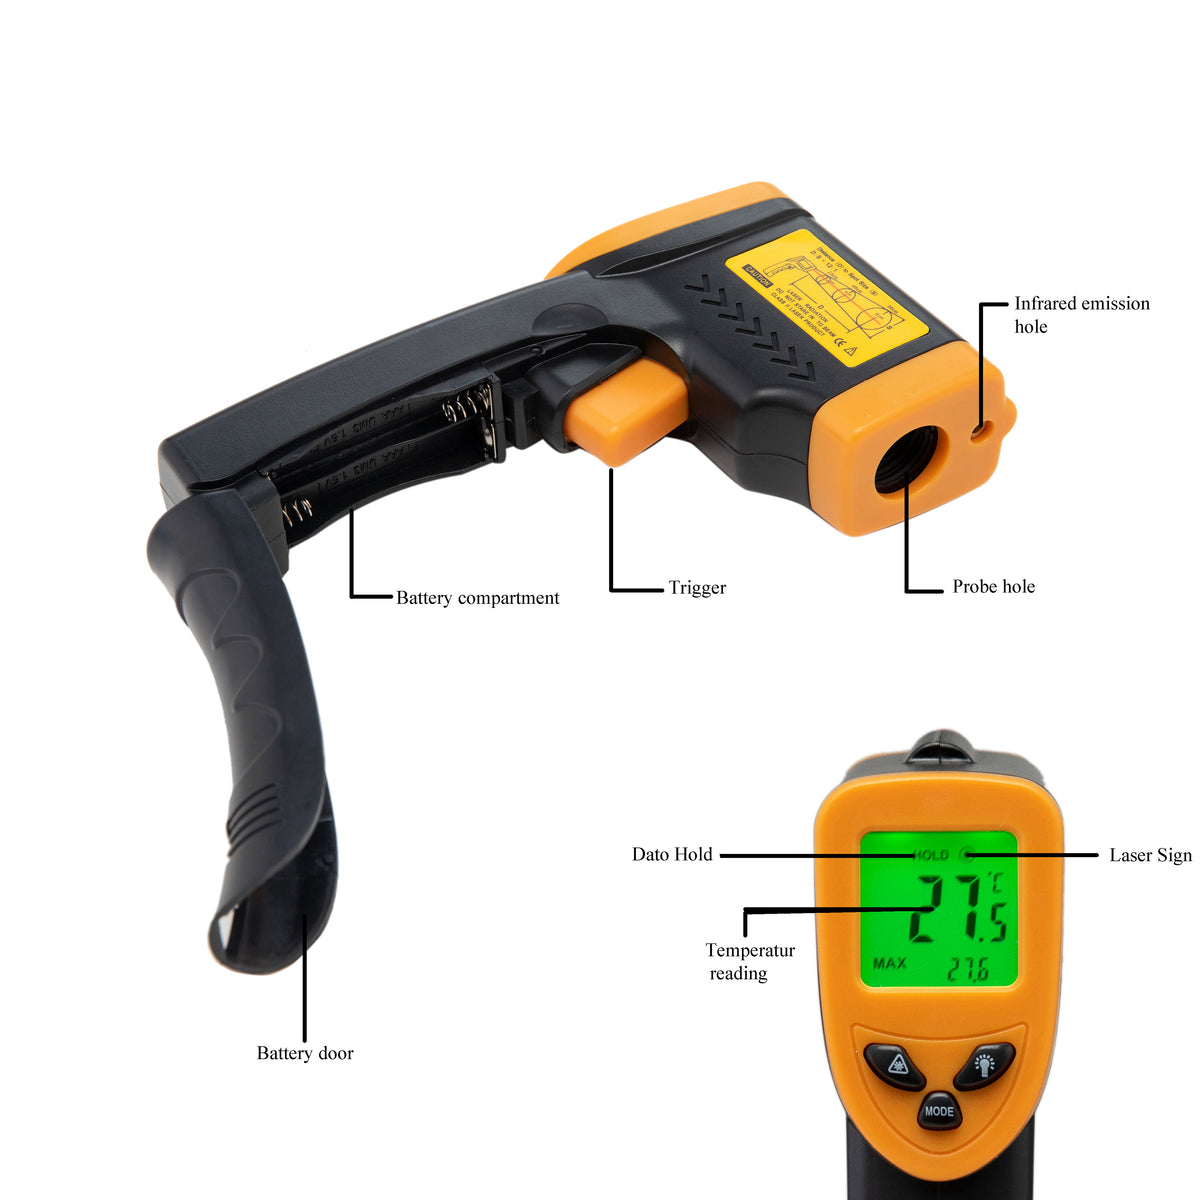 PINNACOLO INFRARED LASER THERMOMETER - 500°C - LASER POINTER FOR